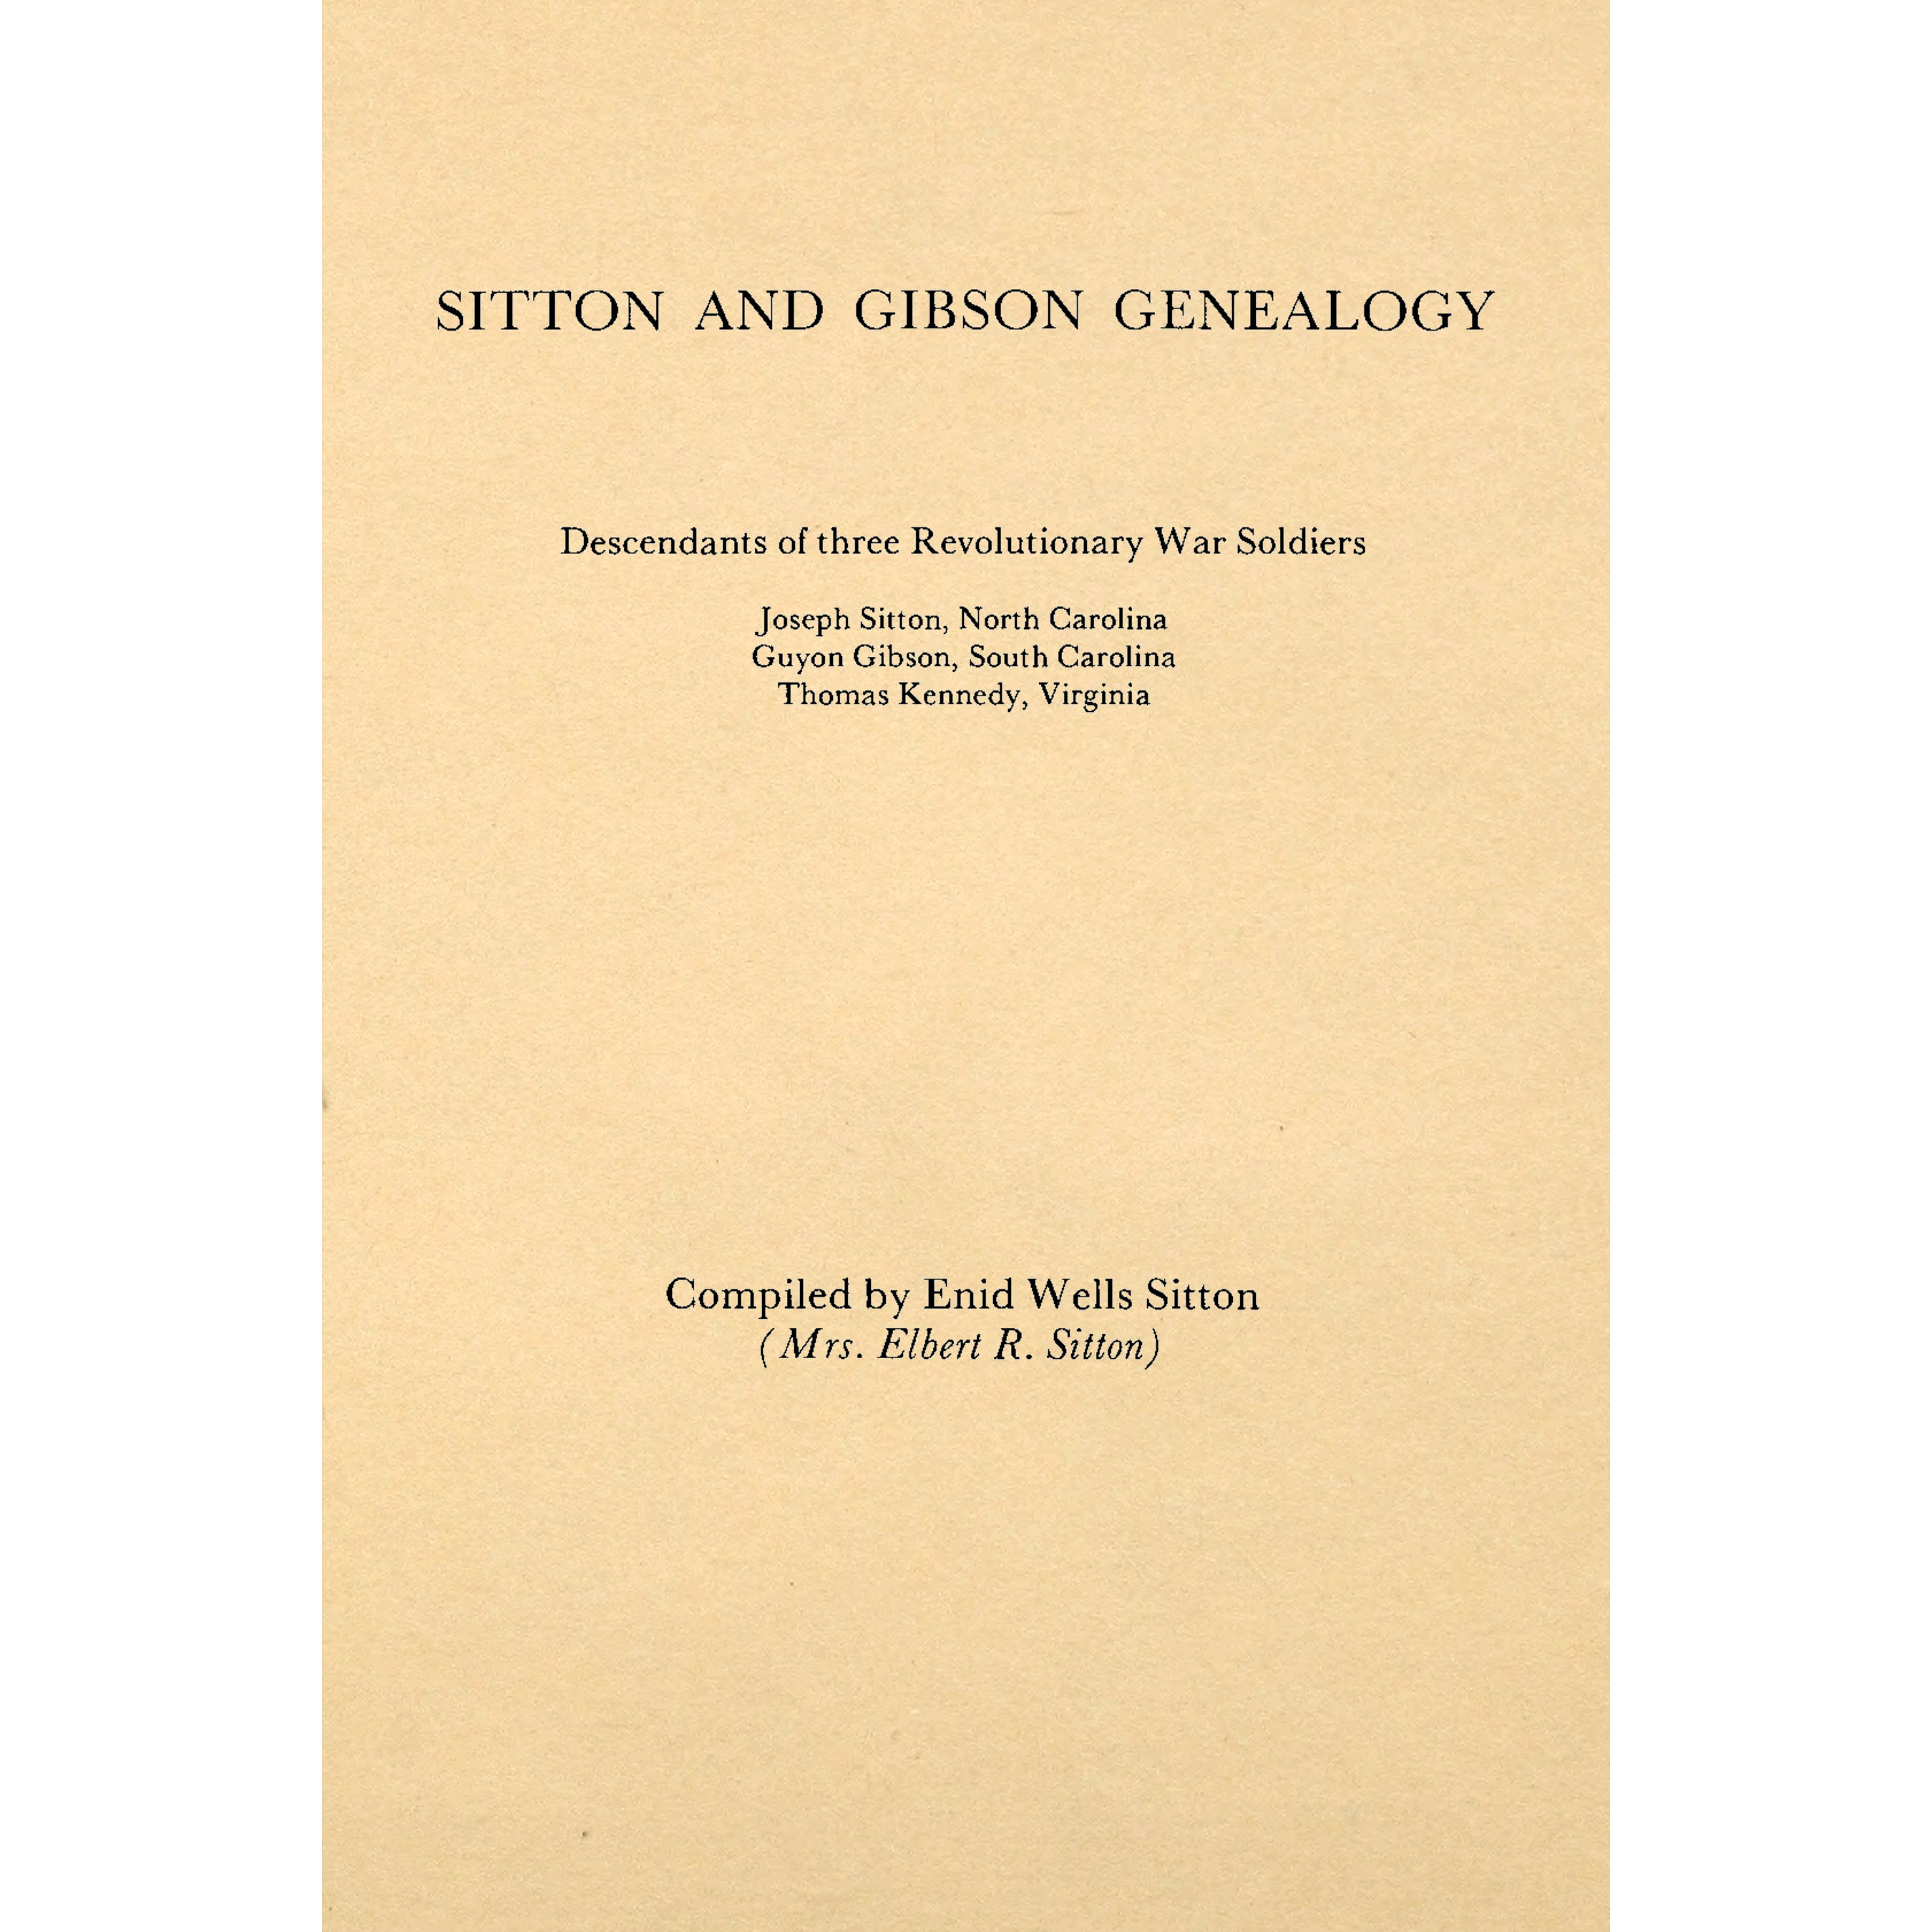 Sitton and Gibson genealogy